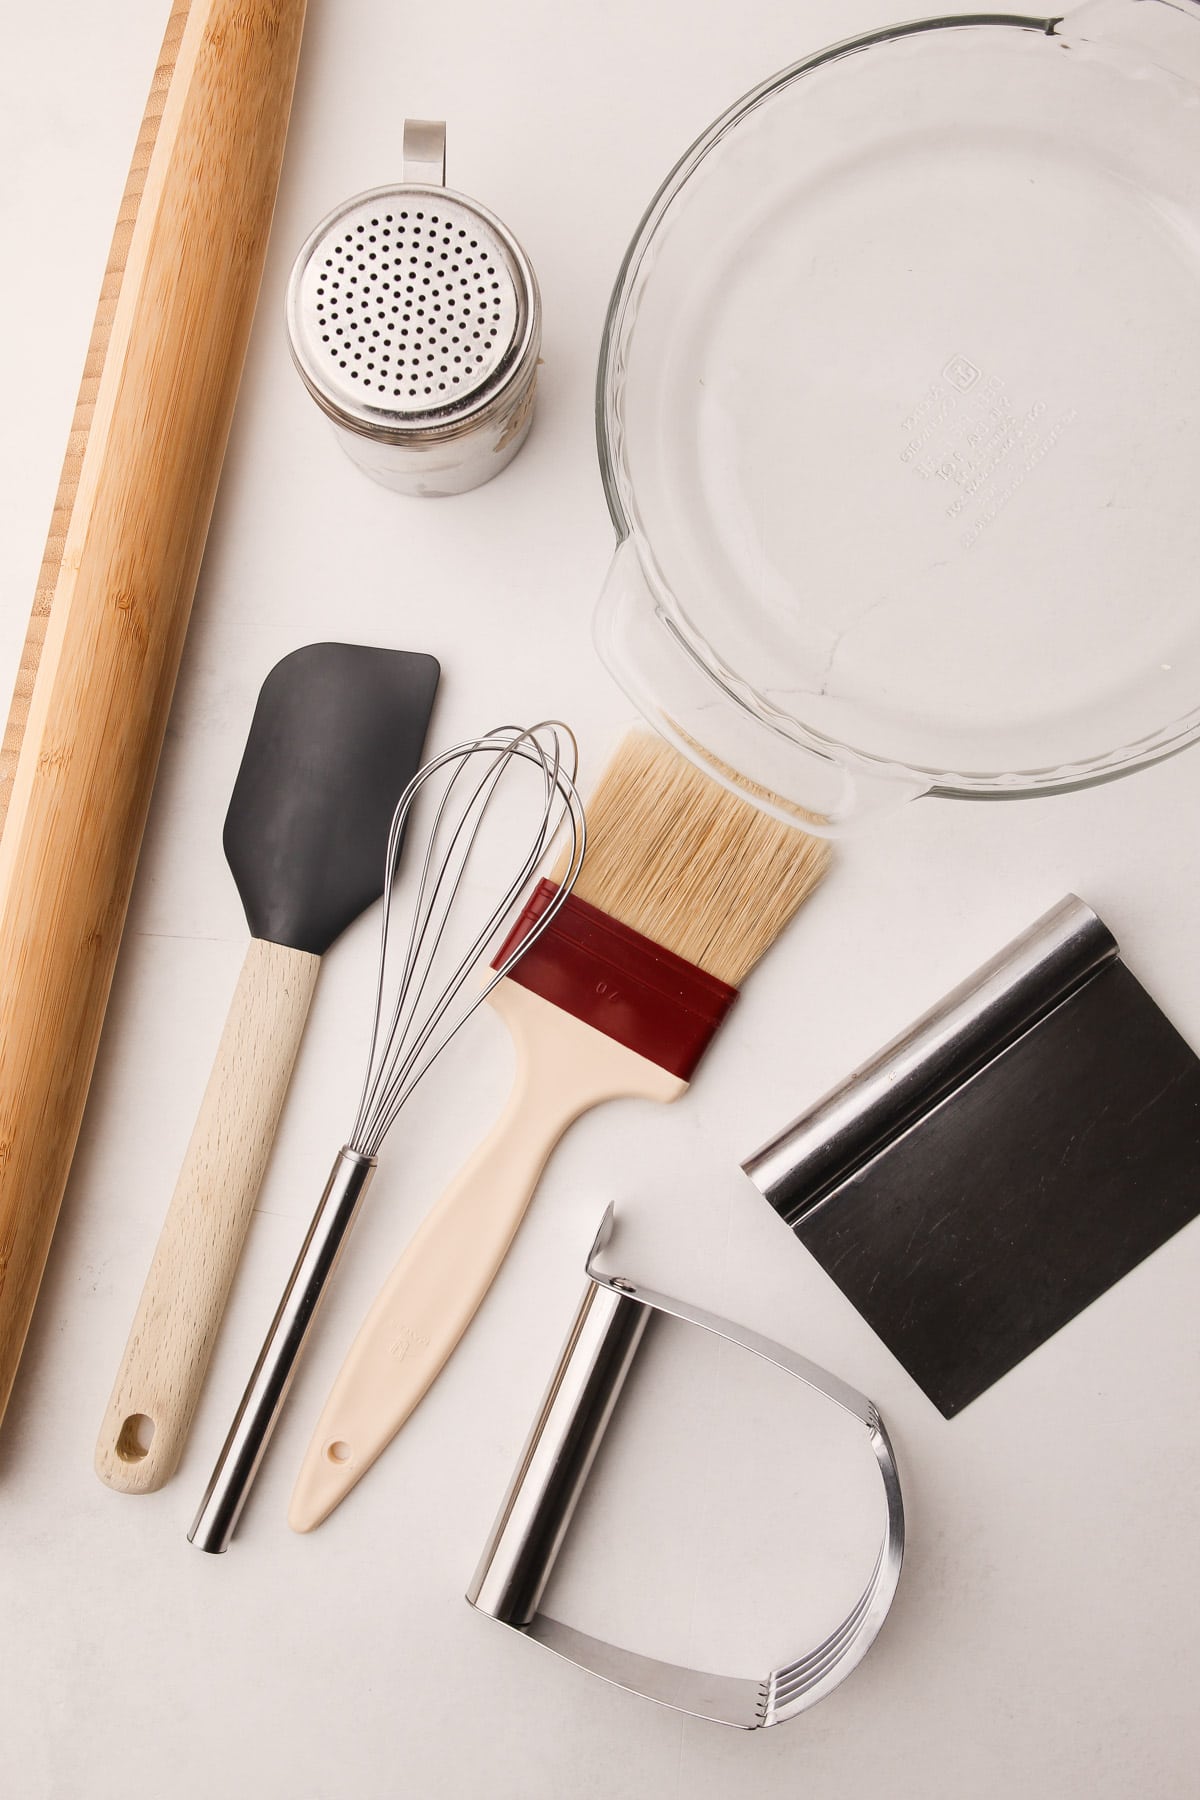 A wooden rolling pin, glass pie plate, rubber spatula, whisk, pastry brush, bench scraper, flour shaker, and handheld pastry blender on a counter surface